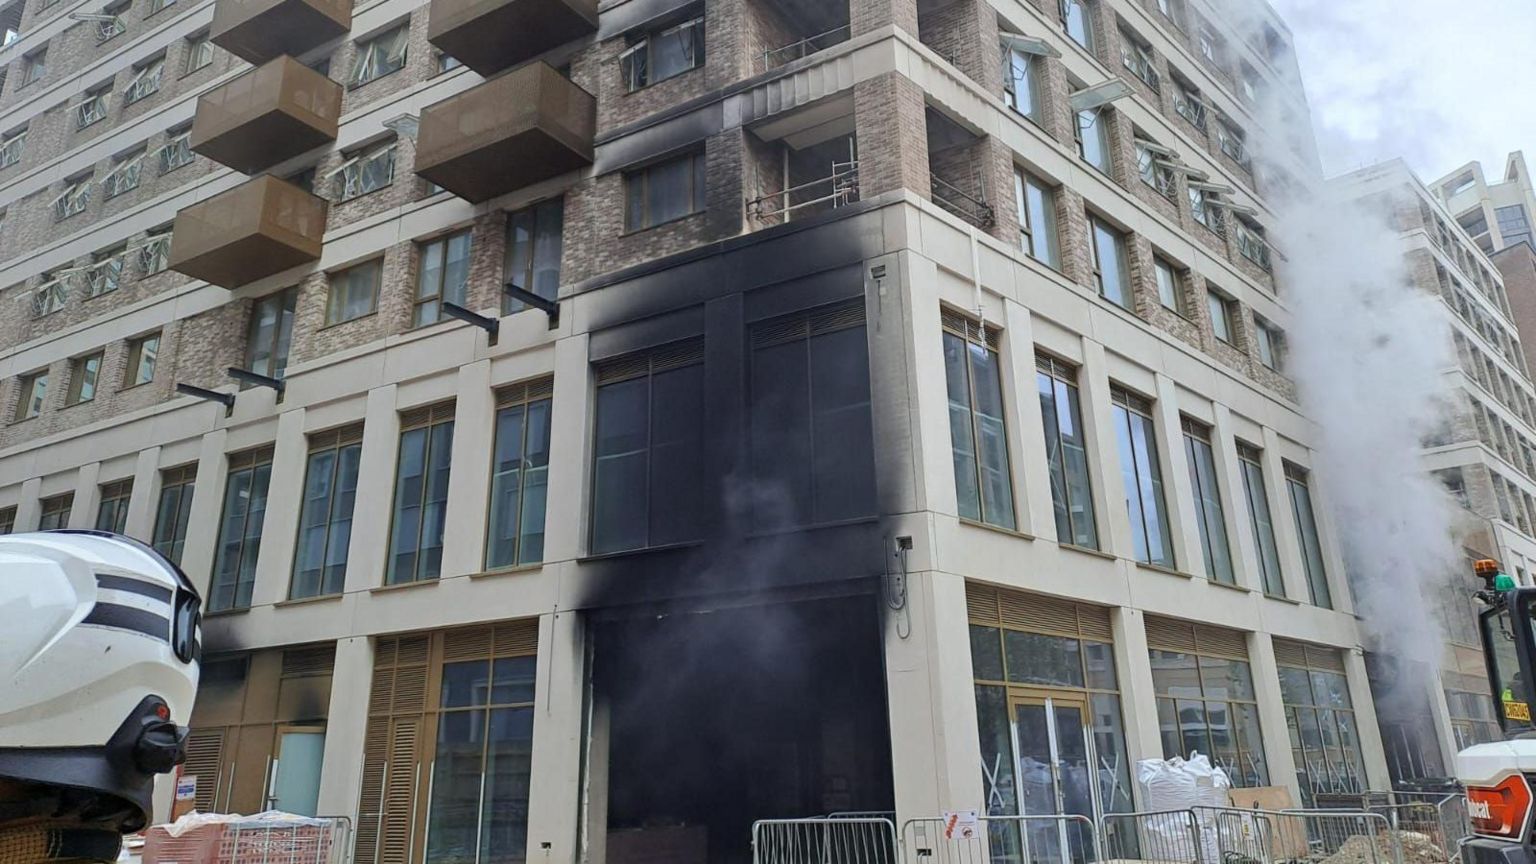 A building blackened by a fire